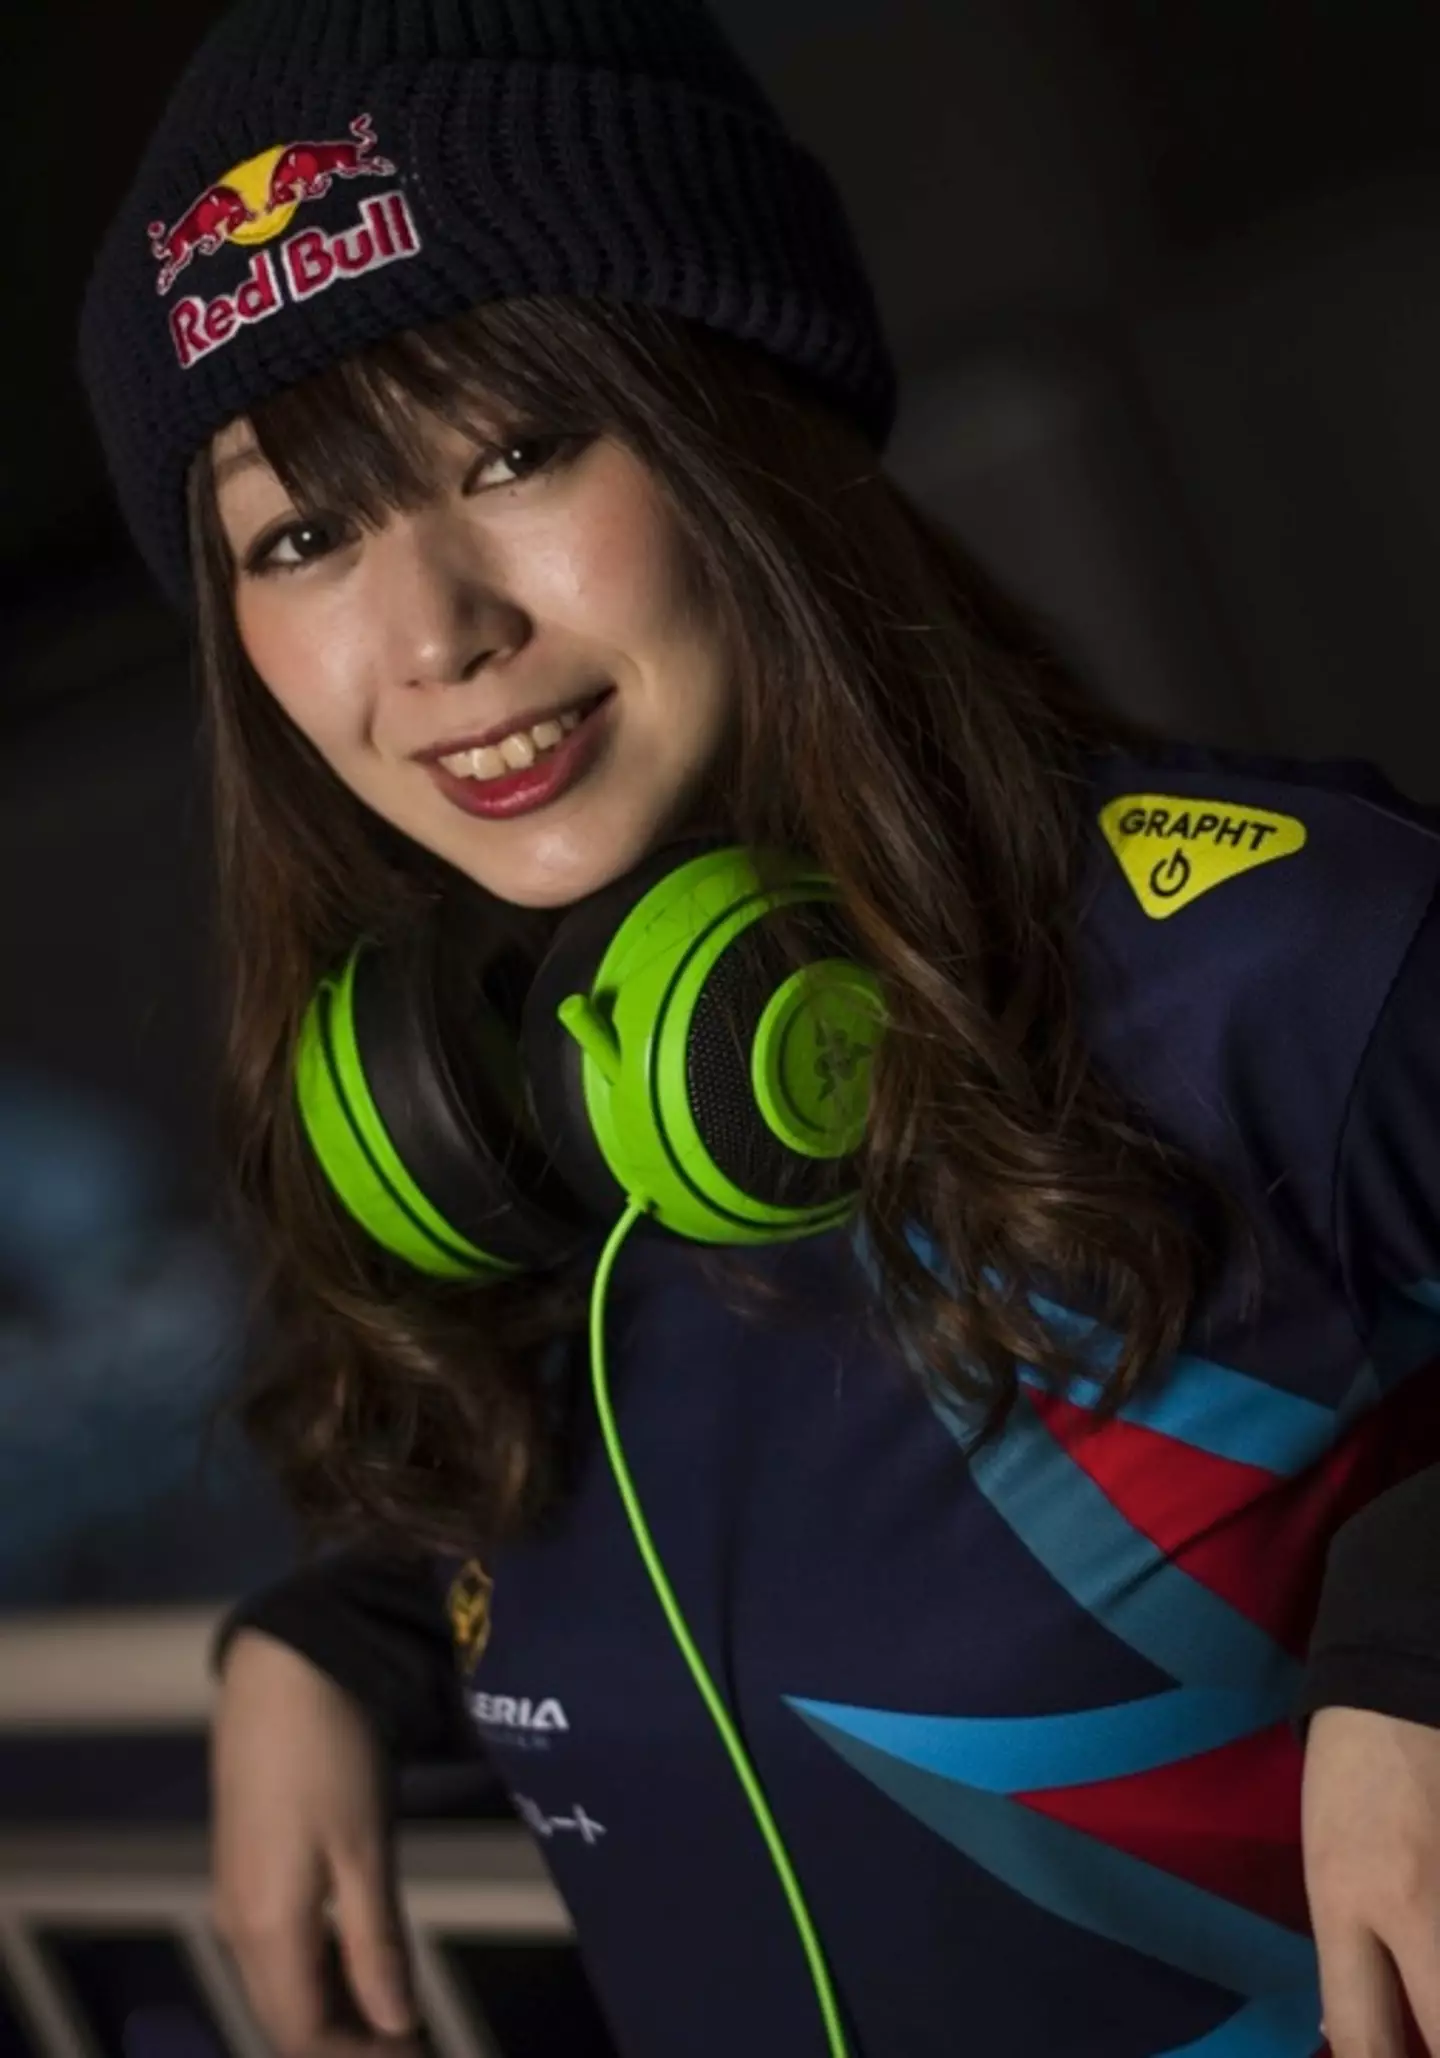 Kana ‘Tanukana’ Tani has been sacked by her gaming team following her comments about short men.